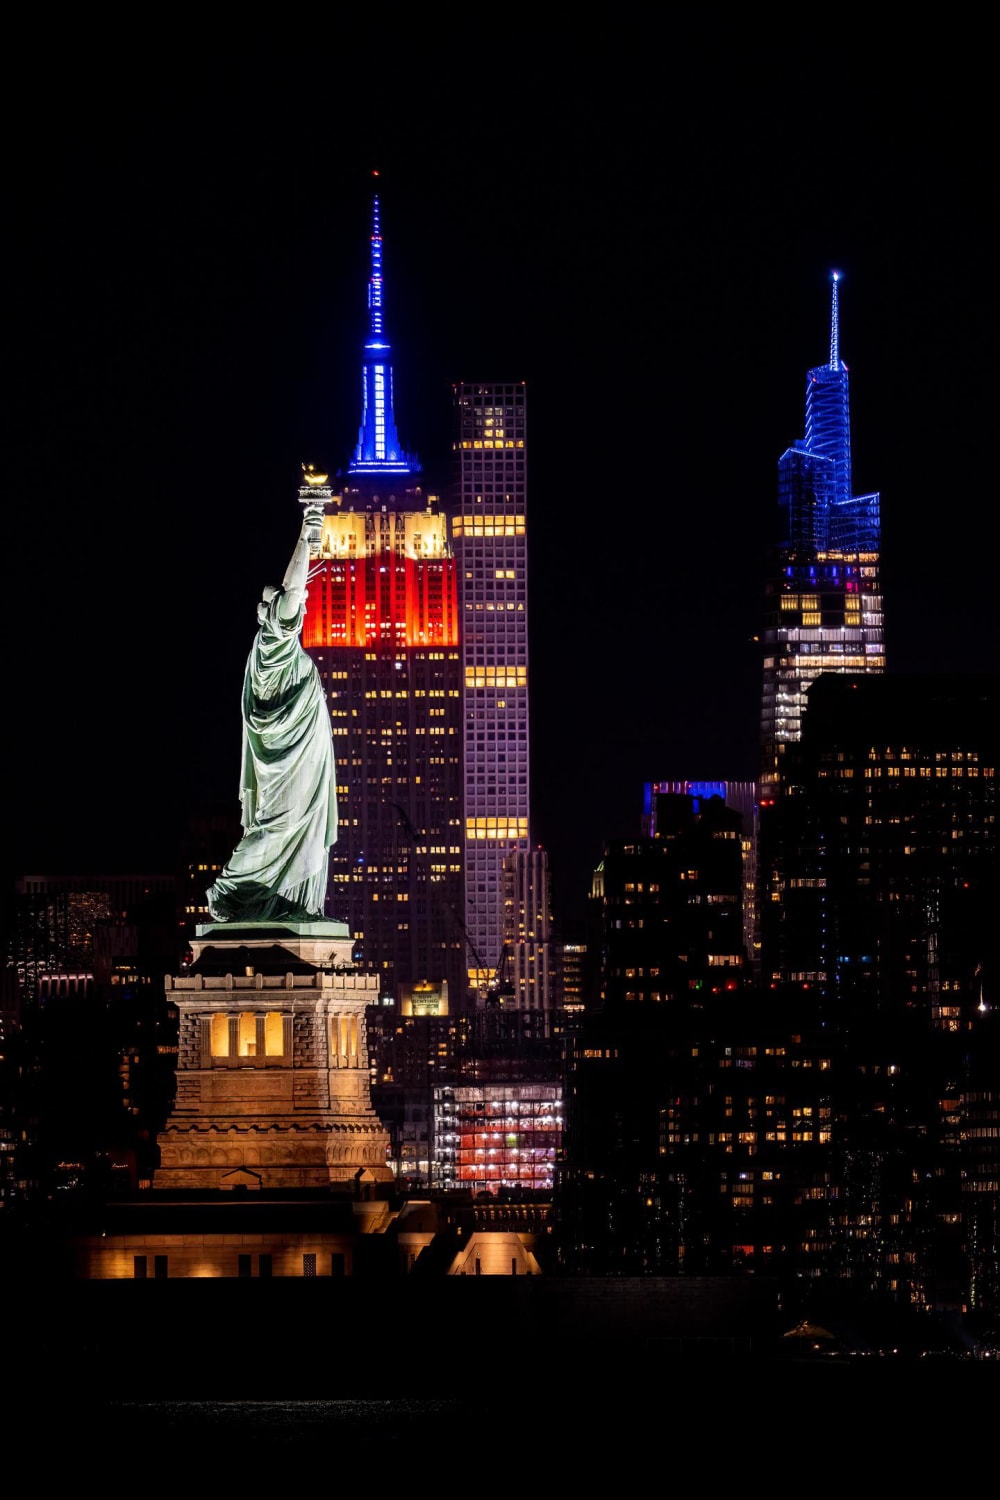 Happy Memorial Day from NYC! Statue of Liberty & Empire State Building (Red, White & Blue)